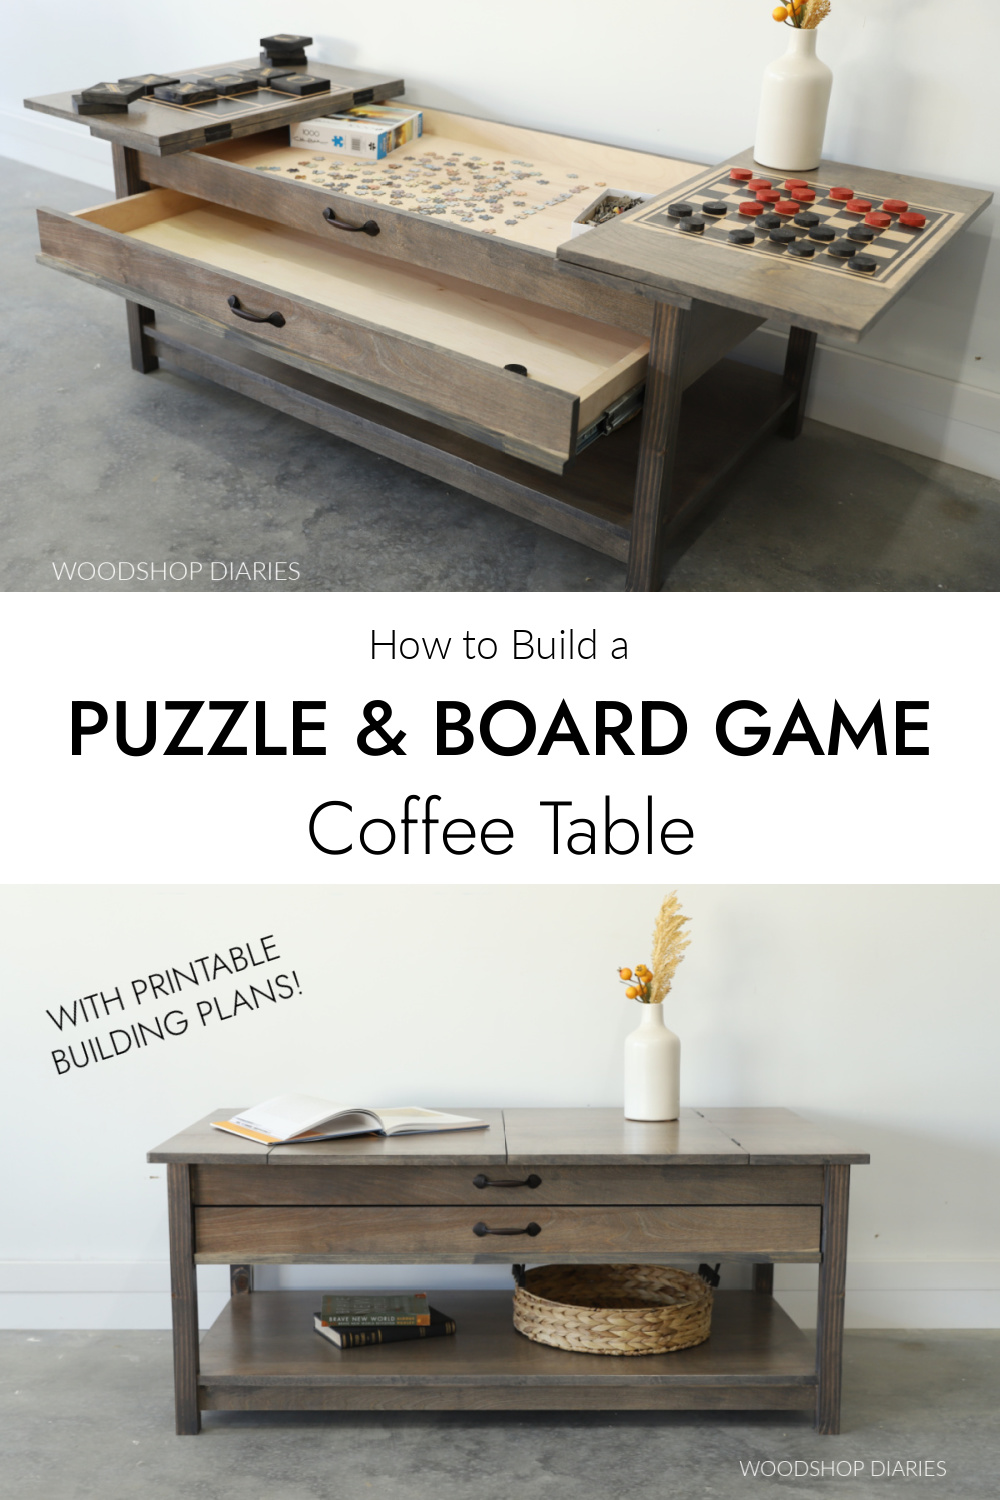 Puzzle table pinterest collage showing open coffee table at top and closed table at bottom with text "how to build a puzzle and board game coffee table"